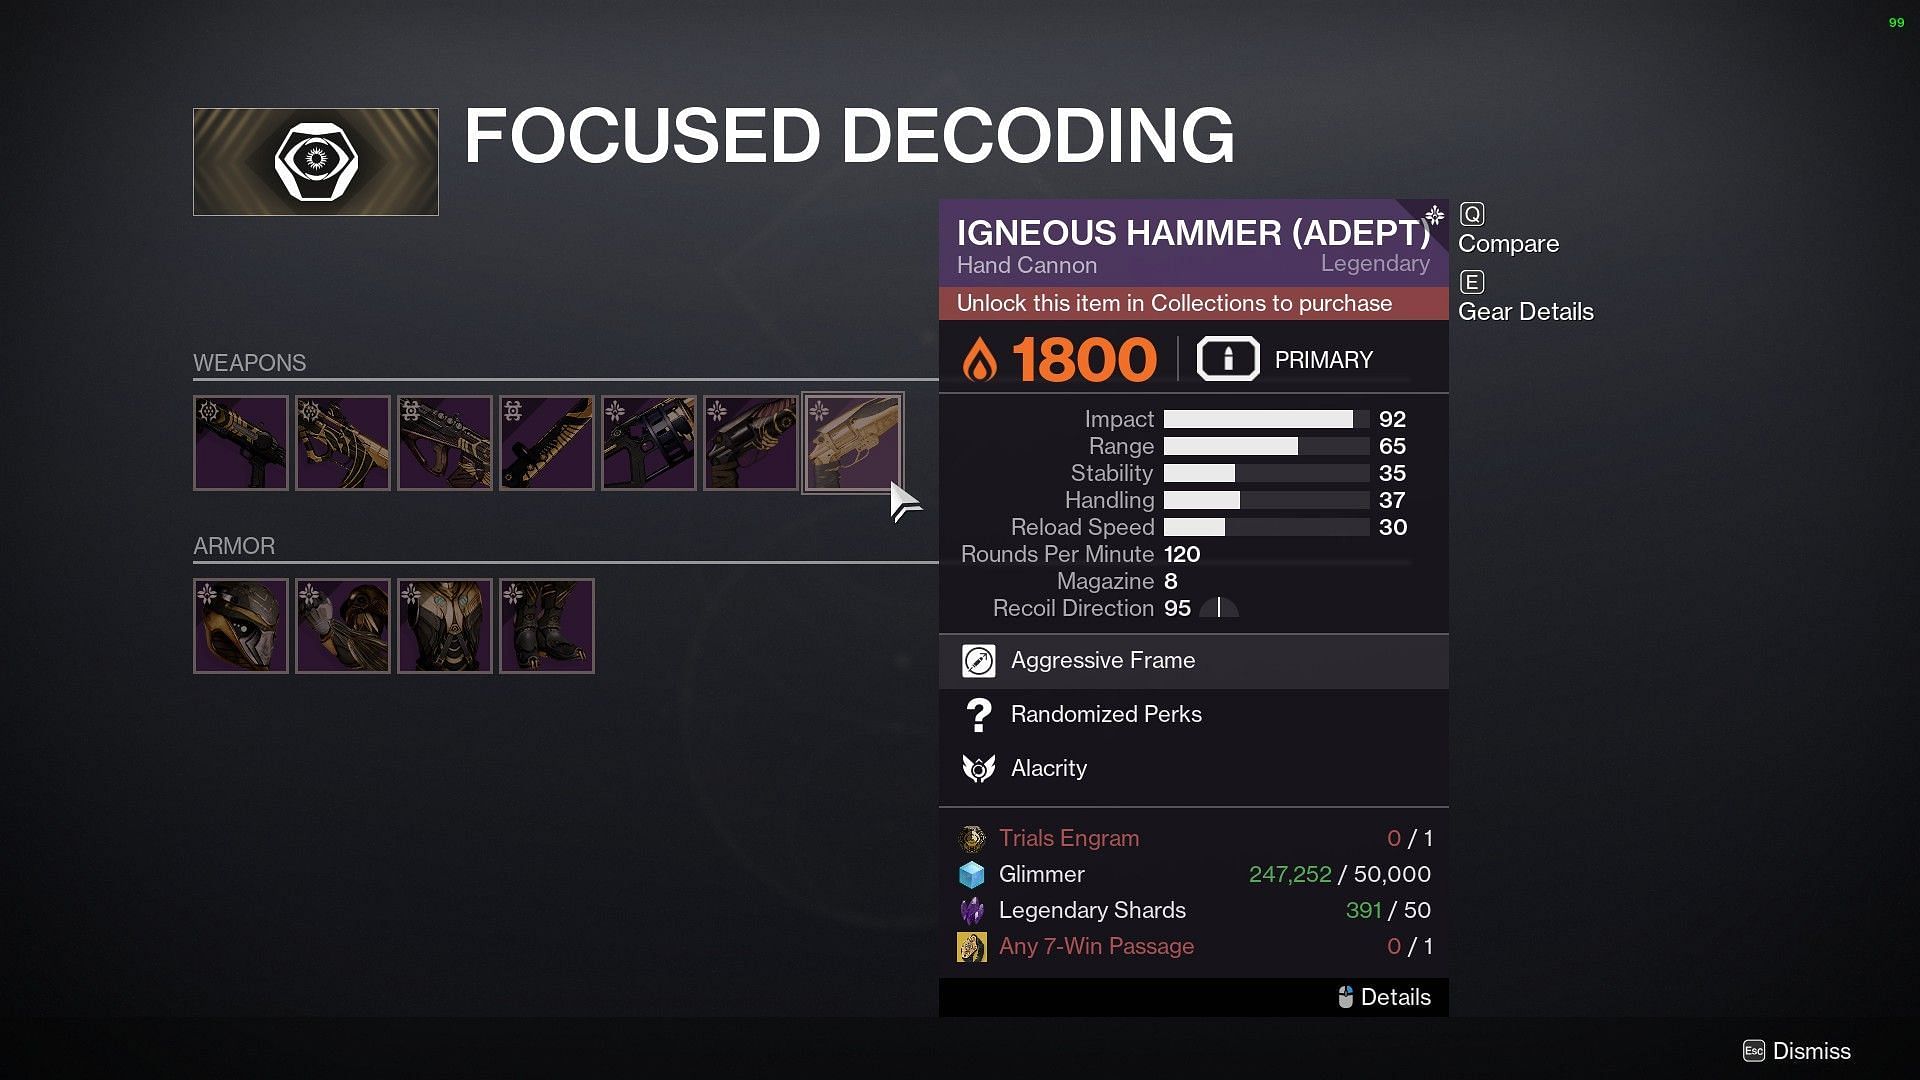 Focused Decoding page in Destiny 2 Shaxx